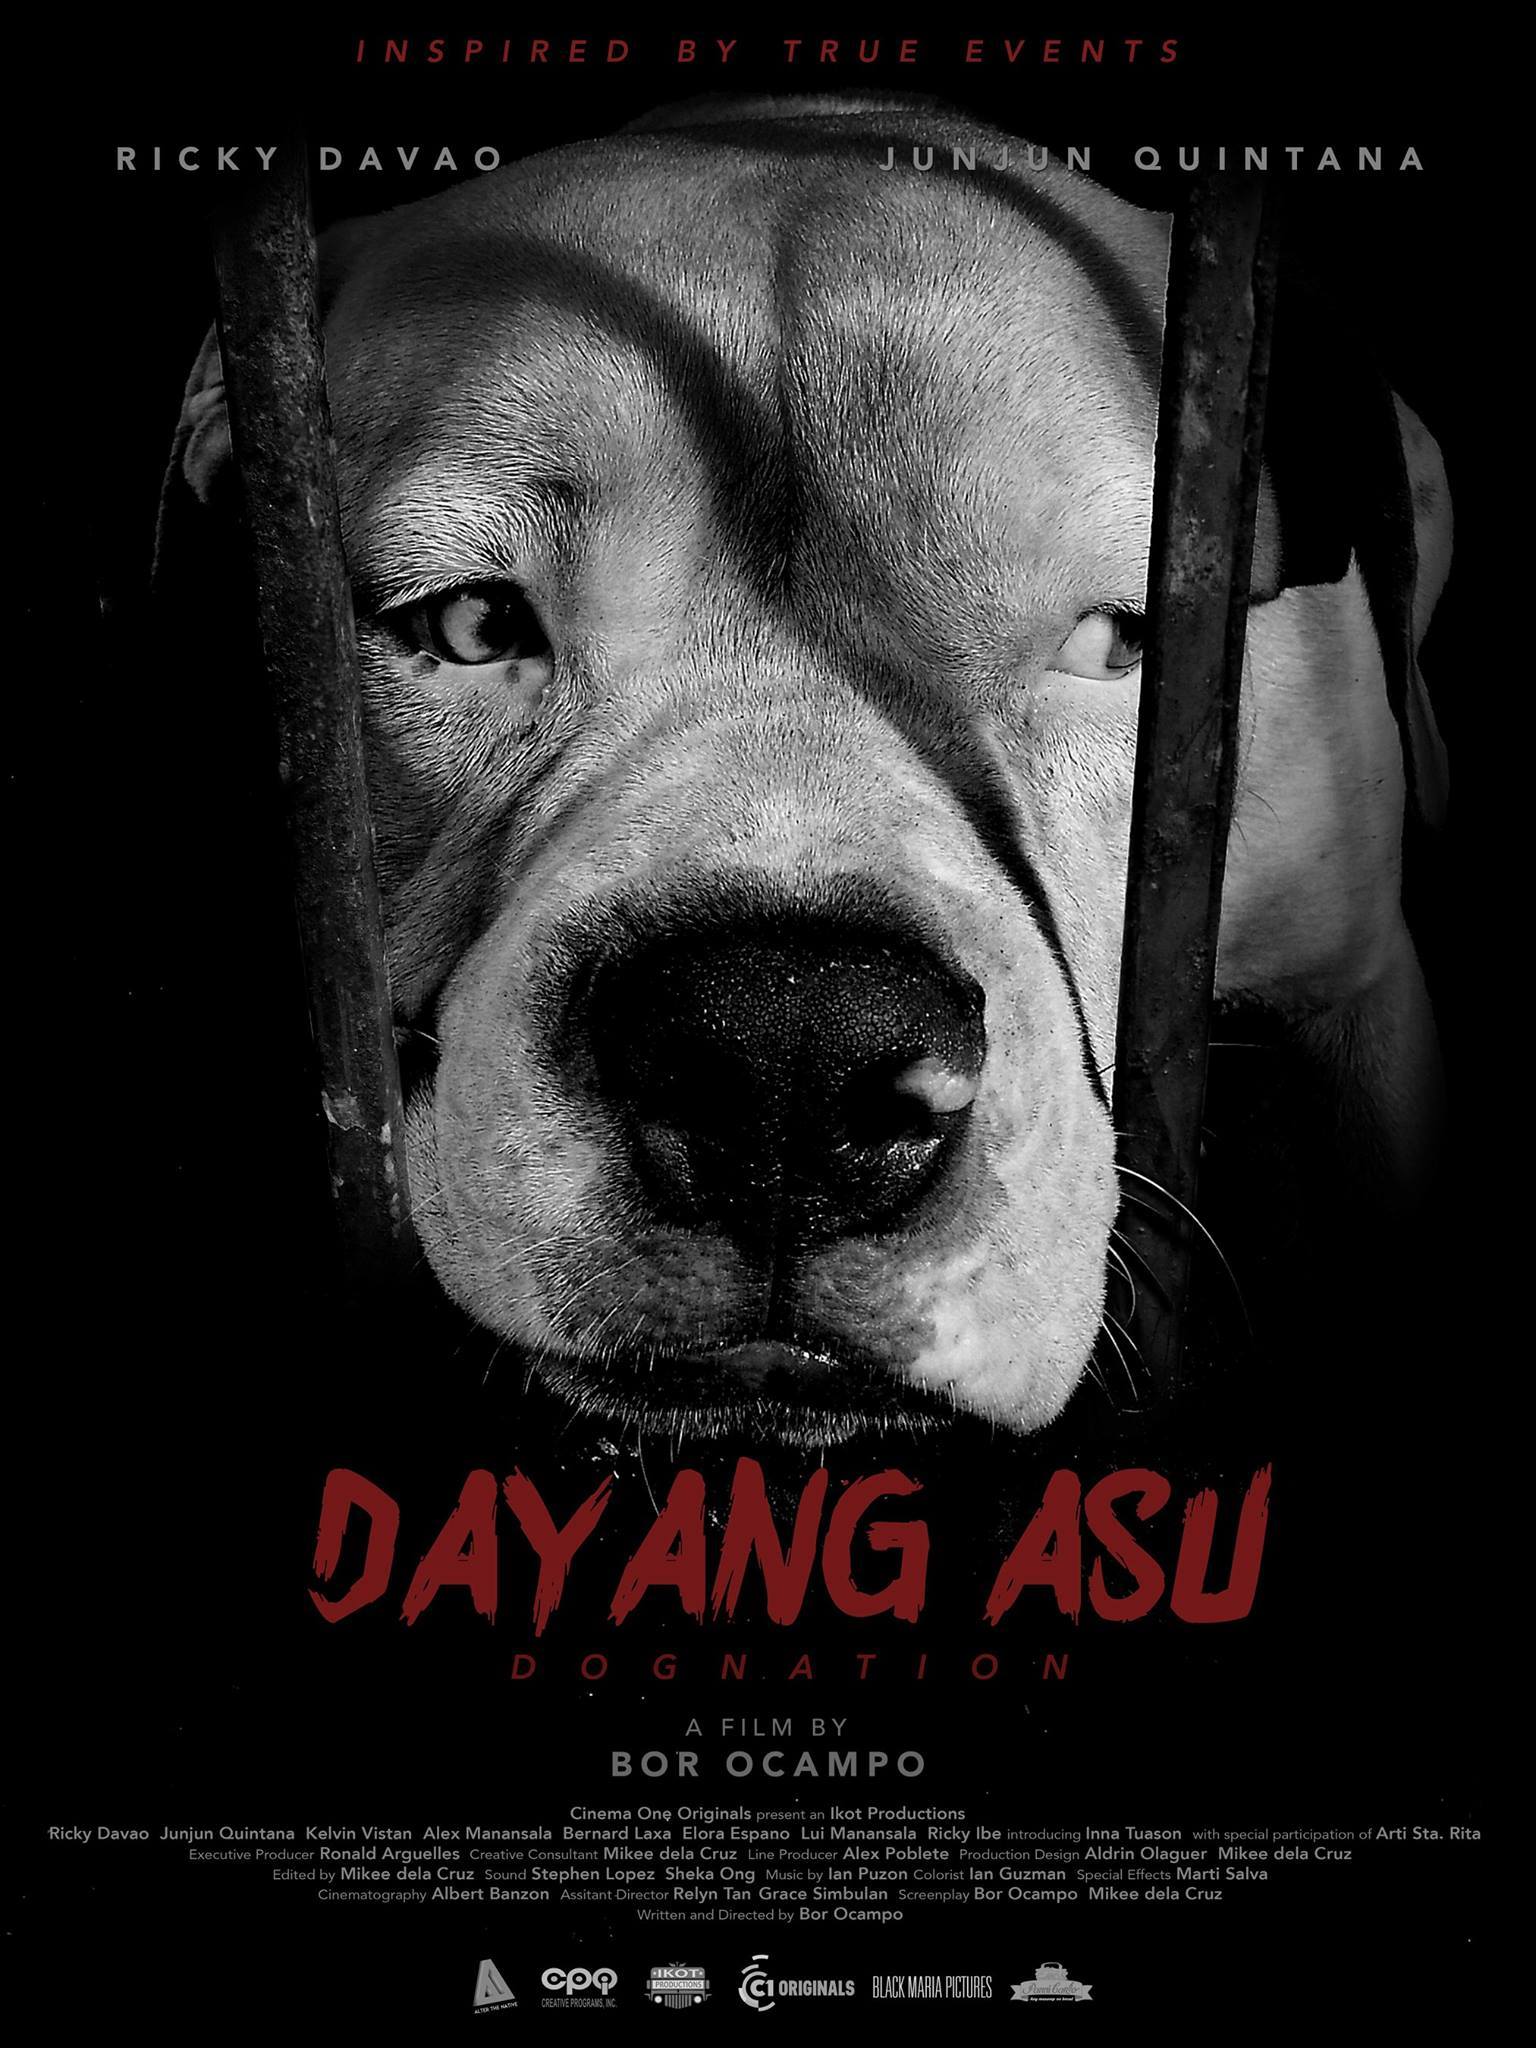 Mell T. Navarro shared his album. November 9 at 11:11am · Edited DAYANG ASU (|Dognation) Directed by: BOR OCAMPO Cinema One Originals 2015 Finalist Genre: Action-Drama SYNOPSIS: Money flows in the quarry business. Running it means constantly keeping a lot of people satisfied. And, digging deeper reveals a scheme designed for legalized corruption. Workers issue “official receipts” for the passway fee collected from every truckload of sand coming from the quarry site, 24/7. A passway marks the delineation between two sides. It is exactly in the middle and serves both as entry and exit. Tonton, the son of a quarry master, enters the world of quarrying. A newbie to the business, he does his best to toughen up and blend in with his co-workers. On top of that, he struggles to prove to his father that he is fit to be part of and eventually run the business. As his co-workers search for a dog to butcher for his birthday, he tries to deal with a landlord who demands for a higher cut on the earnings. However, his diplomatic attempt on swaying the landlord is futile, proving that his father’s ways are more effective. Things get out of hand and he is forced to make a decision. “Dayang Asu” is inspired by true events. SCREENING SCHEDULE: Nov 10 (Tue), 7:00 PM, SM Megamall NOV 11 (Wed), 2:30 PM, Glorietta NOV 12 (Thur), 5:00 PM, SM Megamall / 9:30 PM, Glorietta NOV 13 (Fri), 9:50 PM, Trinoma NOV 14 (Sat), 12:30 PM, SM Megamall NOV 15 (Sun), 2:45 PM, Glorietta FAN PAGE >> https://www.facebook.com/DayangAsuIndieFilm/?fref=ts CAST: Ricky Davao Jun-Jun Quintana Inna Tuason Lui Quiambao Manansala Bernard Laxa Elora Españo Kelvin Vistan Alex Manansala Marco Nepomuceno Ronnie Tayag Bajun Lacap Gina Villa PRODUCTION STAFF: Director, Writer -- Bor Ocampo Executive Producer -- Ronald Arguelles Line Producer -- Alex Poblete Associate Producers -- Jen Timbol, Vanessa Ulgado, Rolly Palmes Cinematographer -- Albert Banzon Assistant Directors -- Relyn A. Tan, Grace Simbul